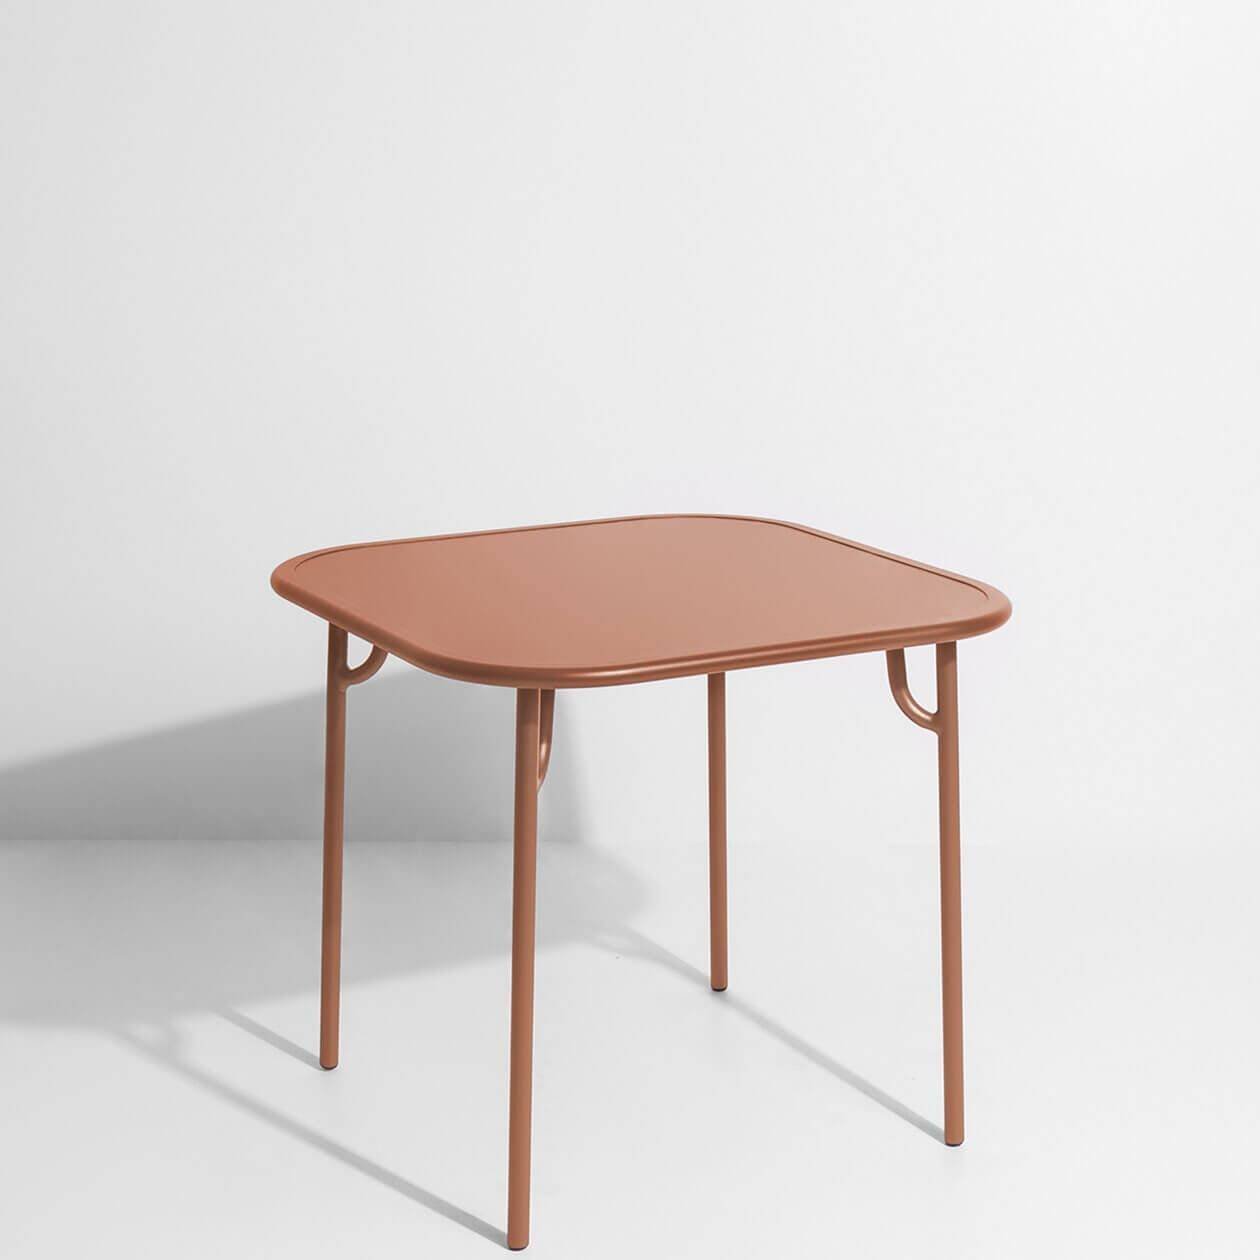 Week-End Plain Square Dining Table - Terracotta